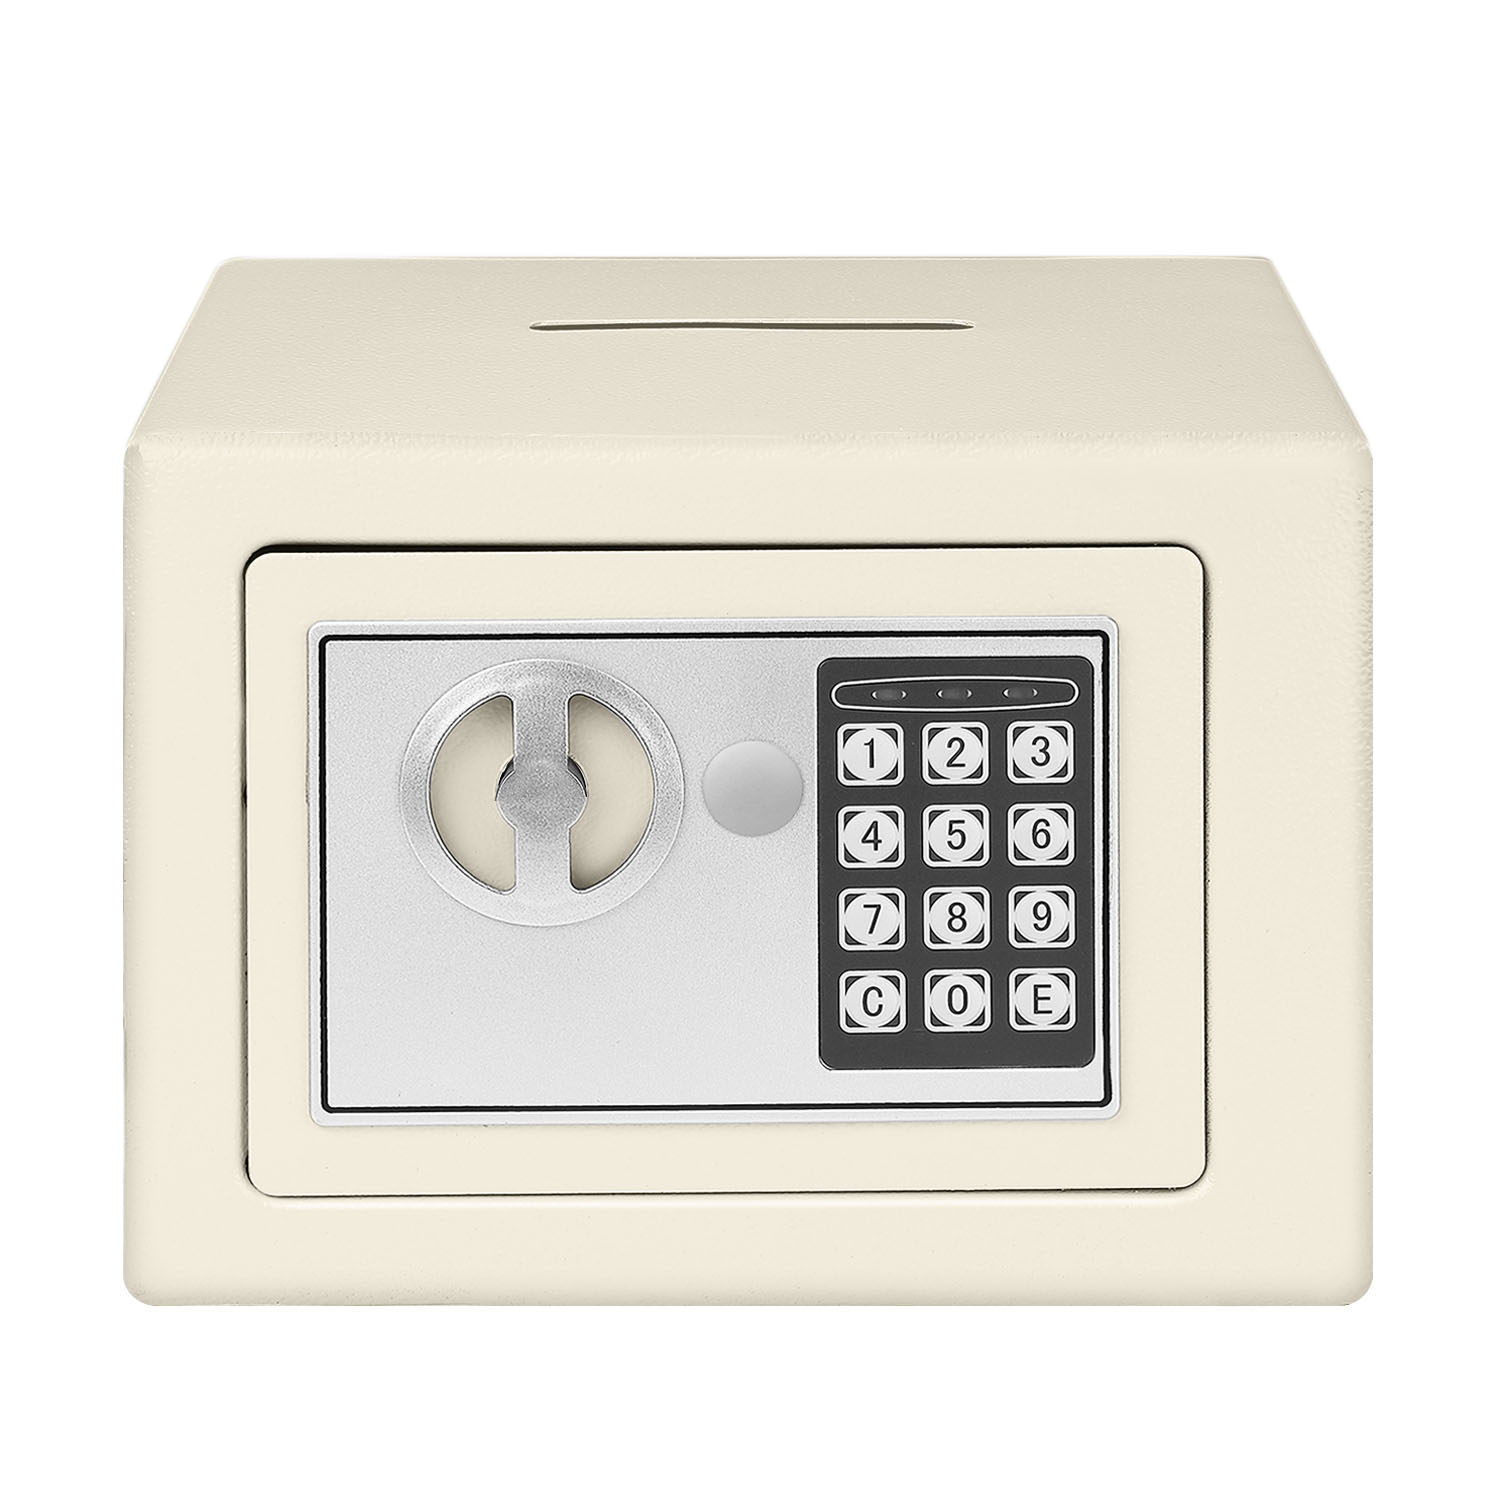 safebox with money counter